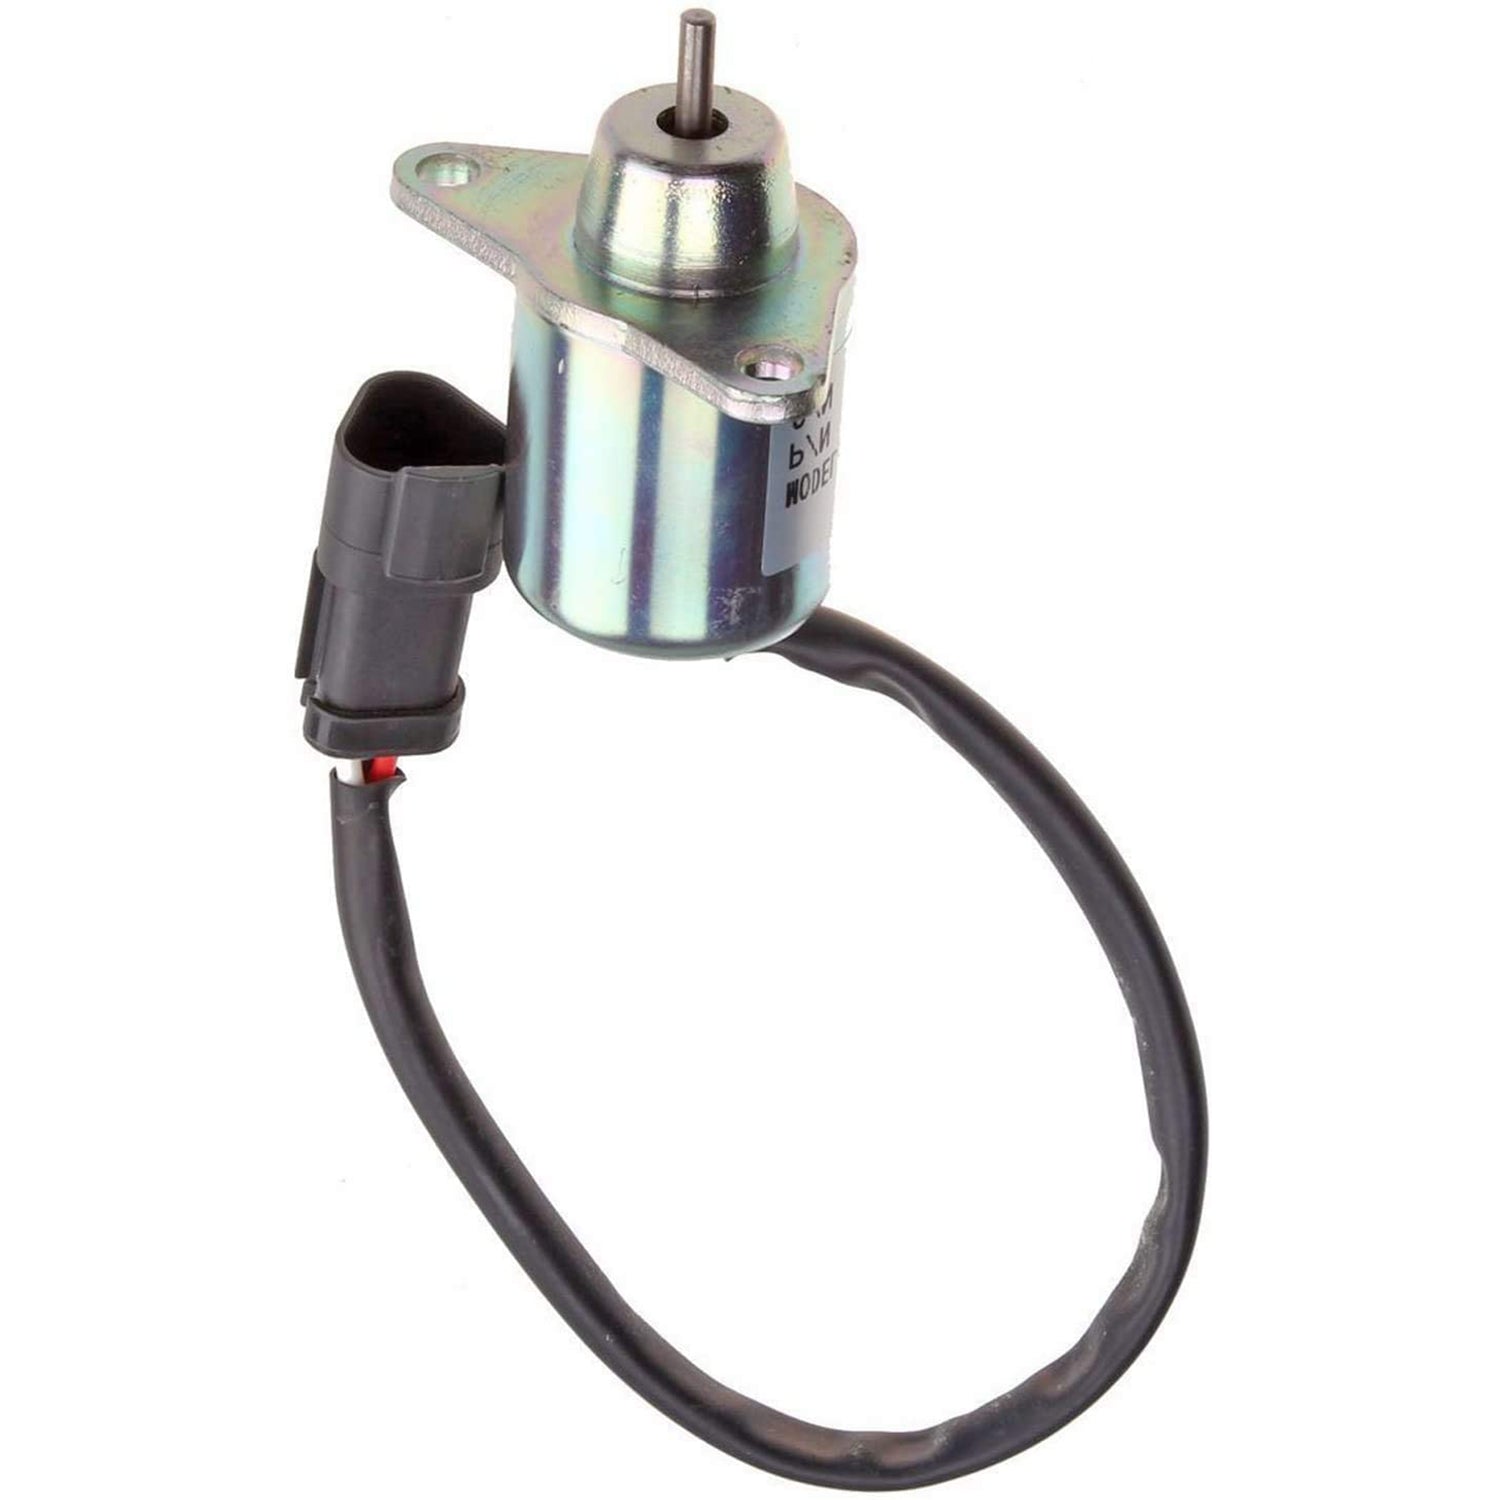 Stop Shutoff Solenoid 41-6383 SA-4920 Fit for Yanmar Engine Replaces Thermo King 4TNE84